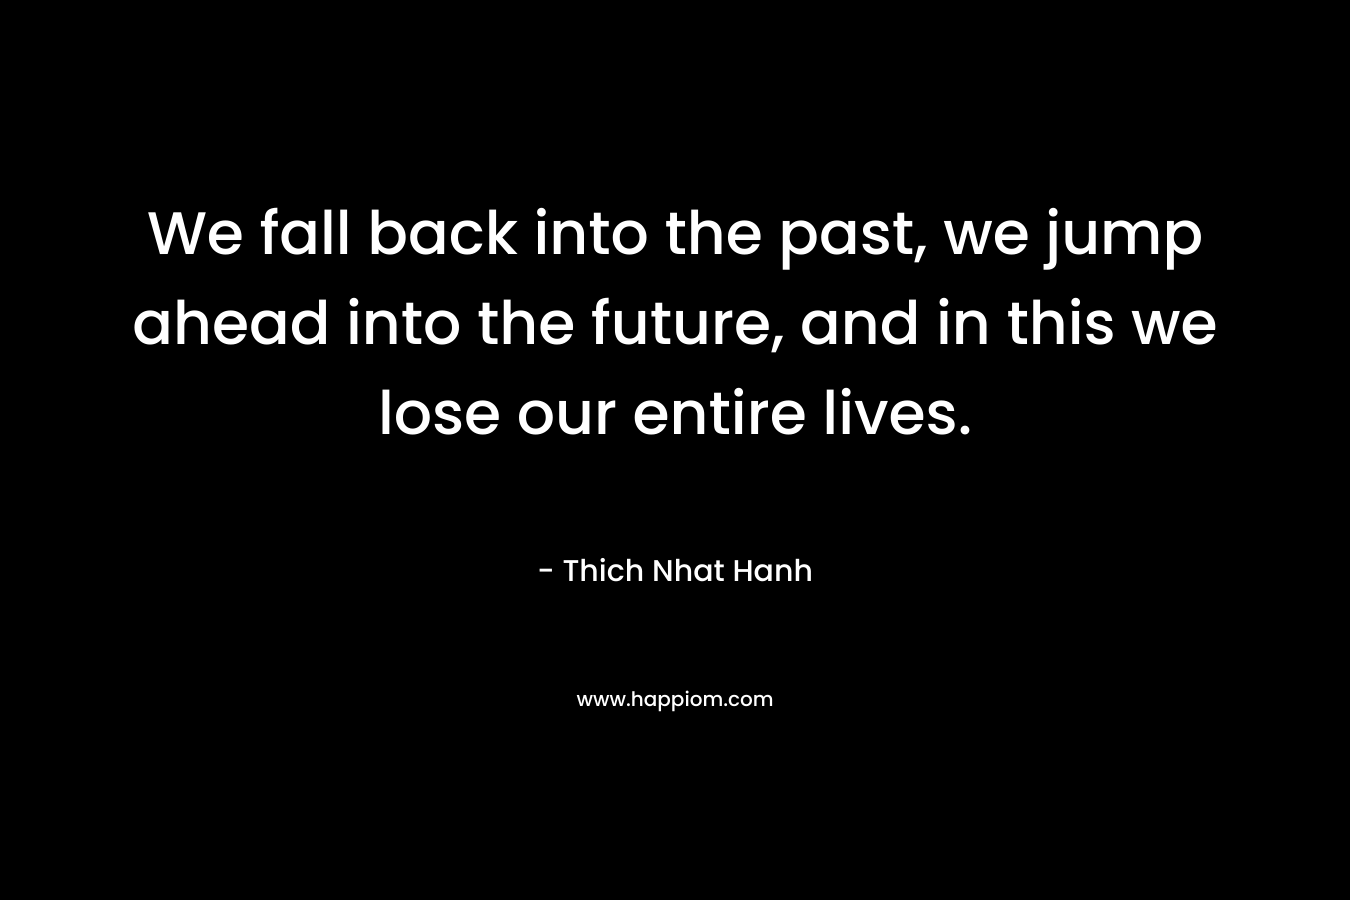 We fall back into the past, we jump ahead into the future, and in this we lose our entire lives.